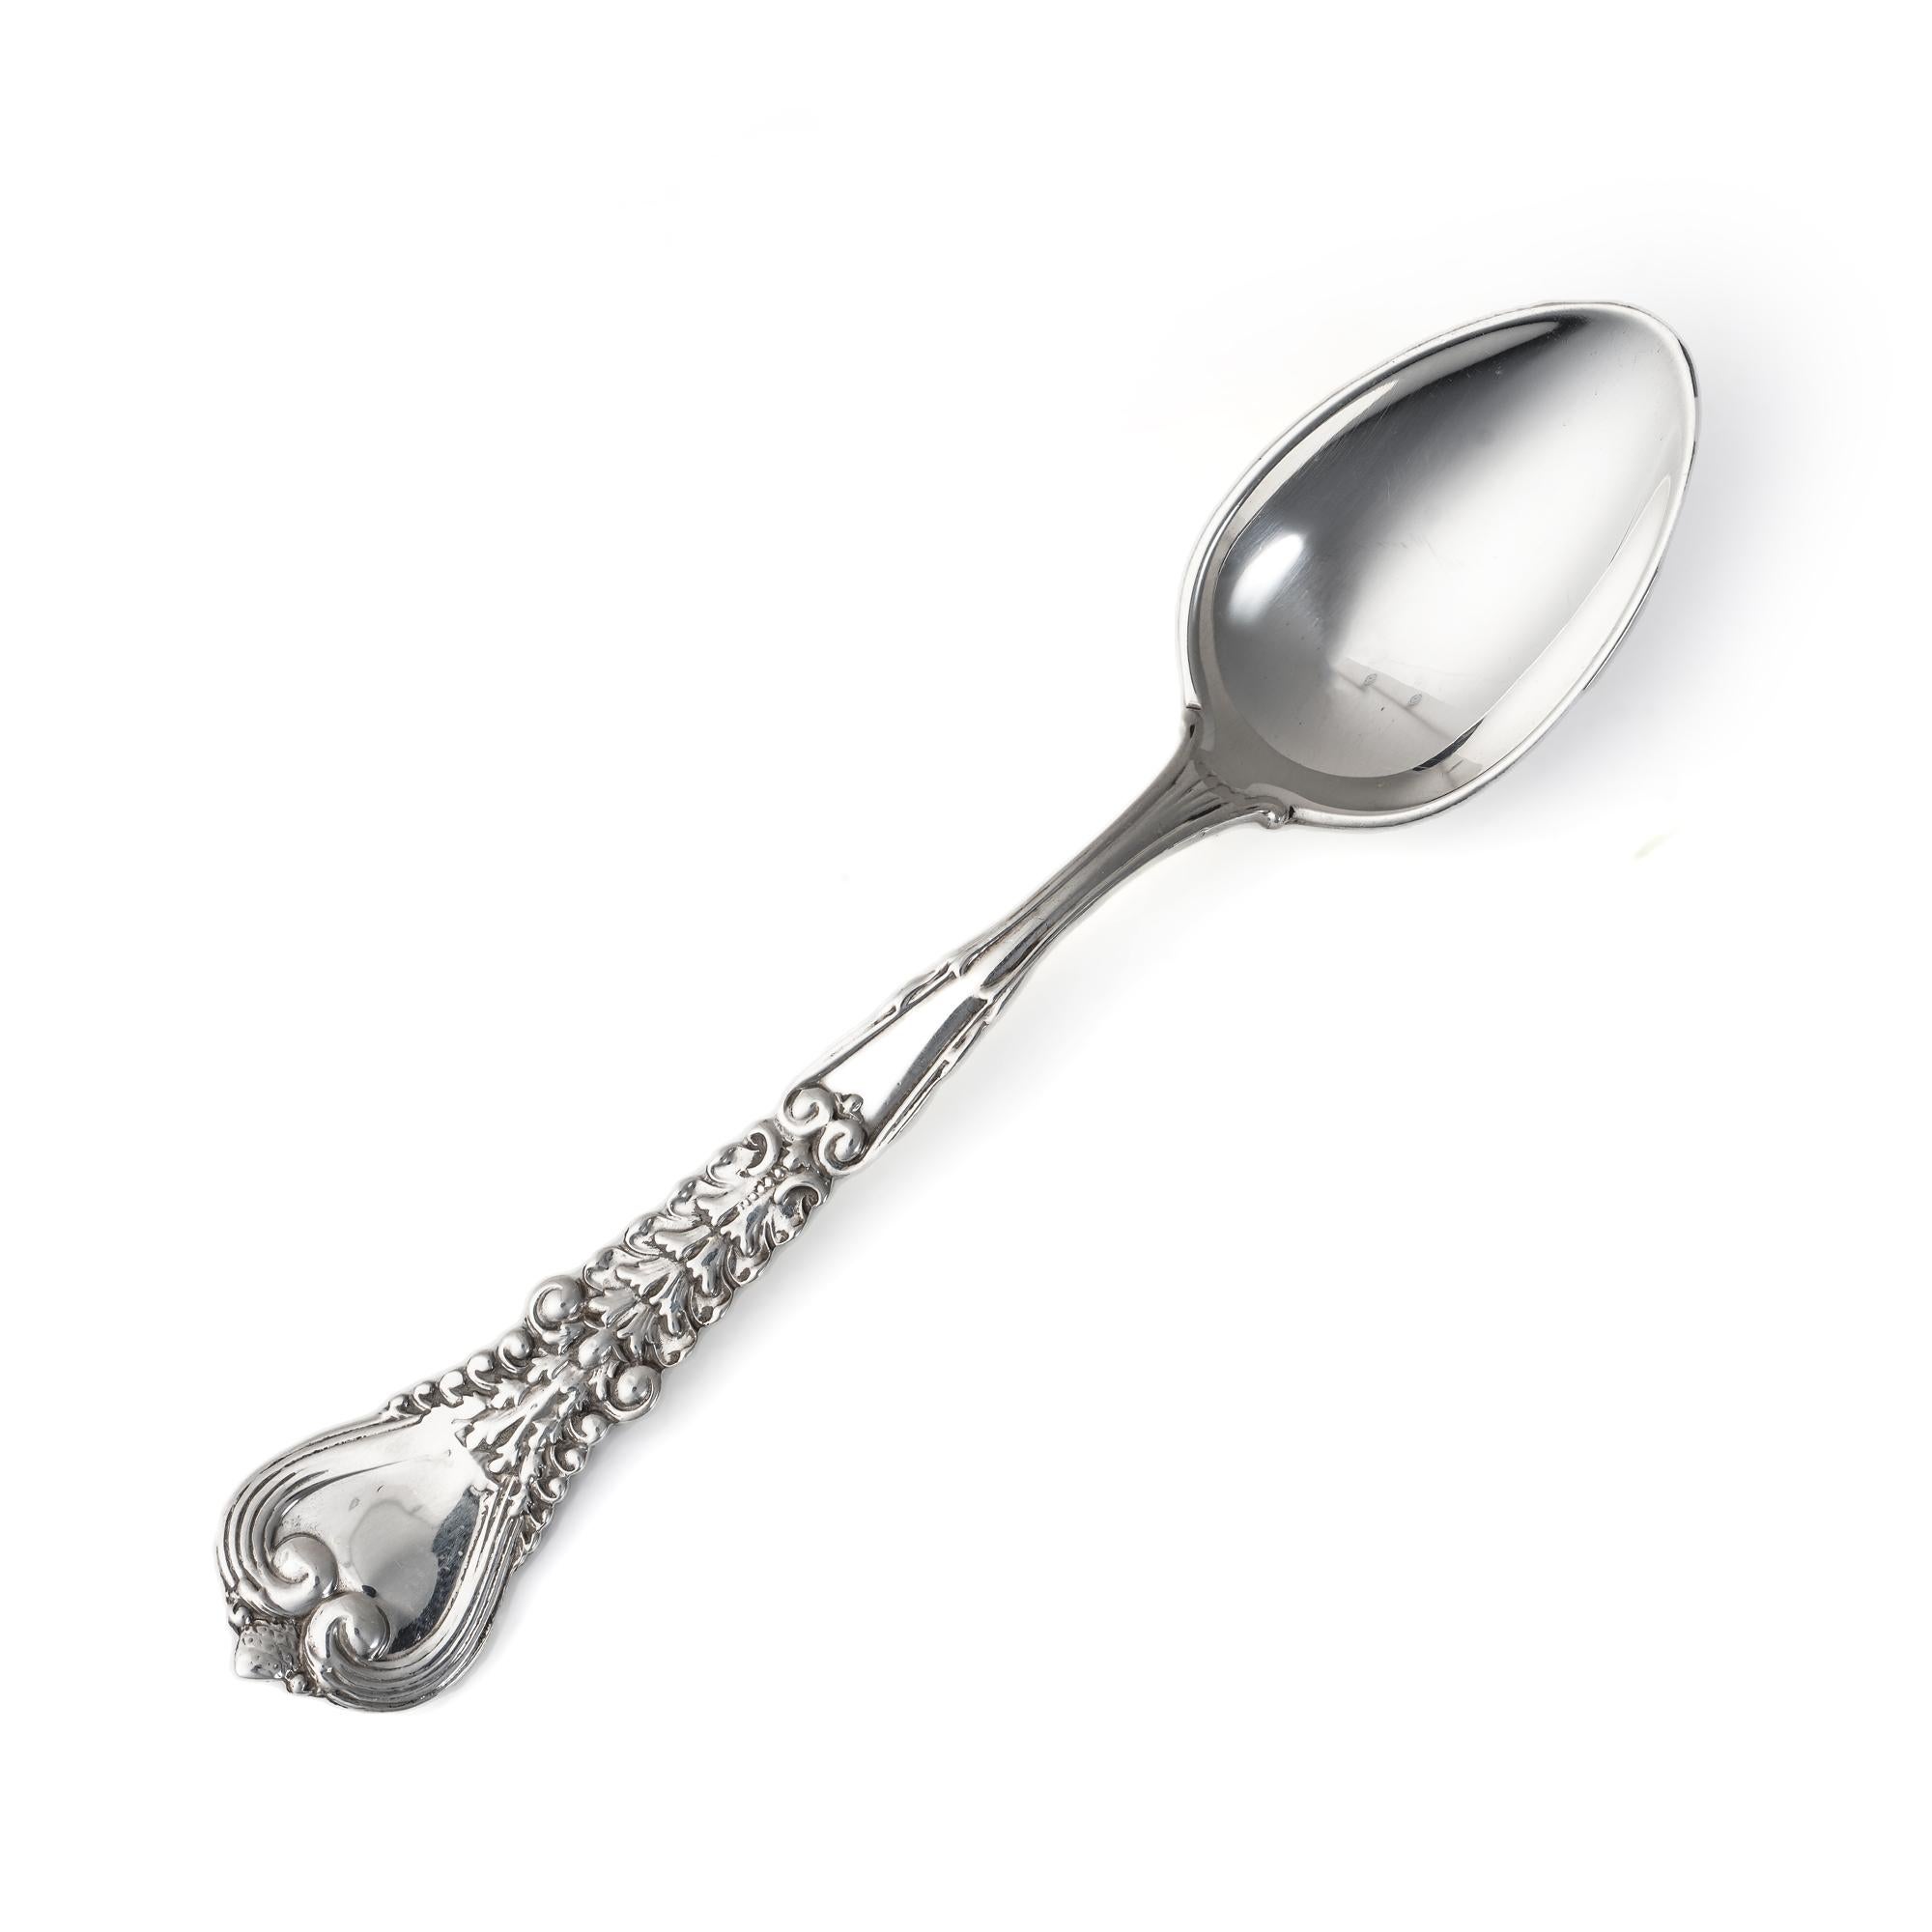 Antique Tiffany & Co. Sterling Silver Florentine Pattern Demitasse Spoon For Sale 1